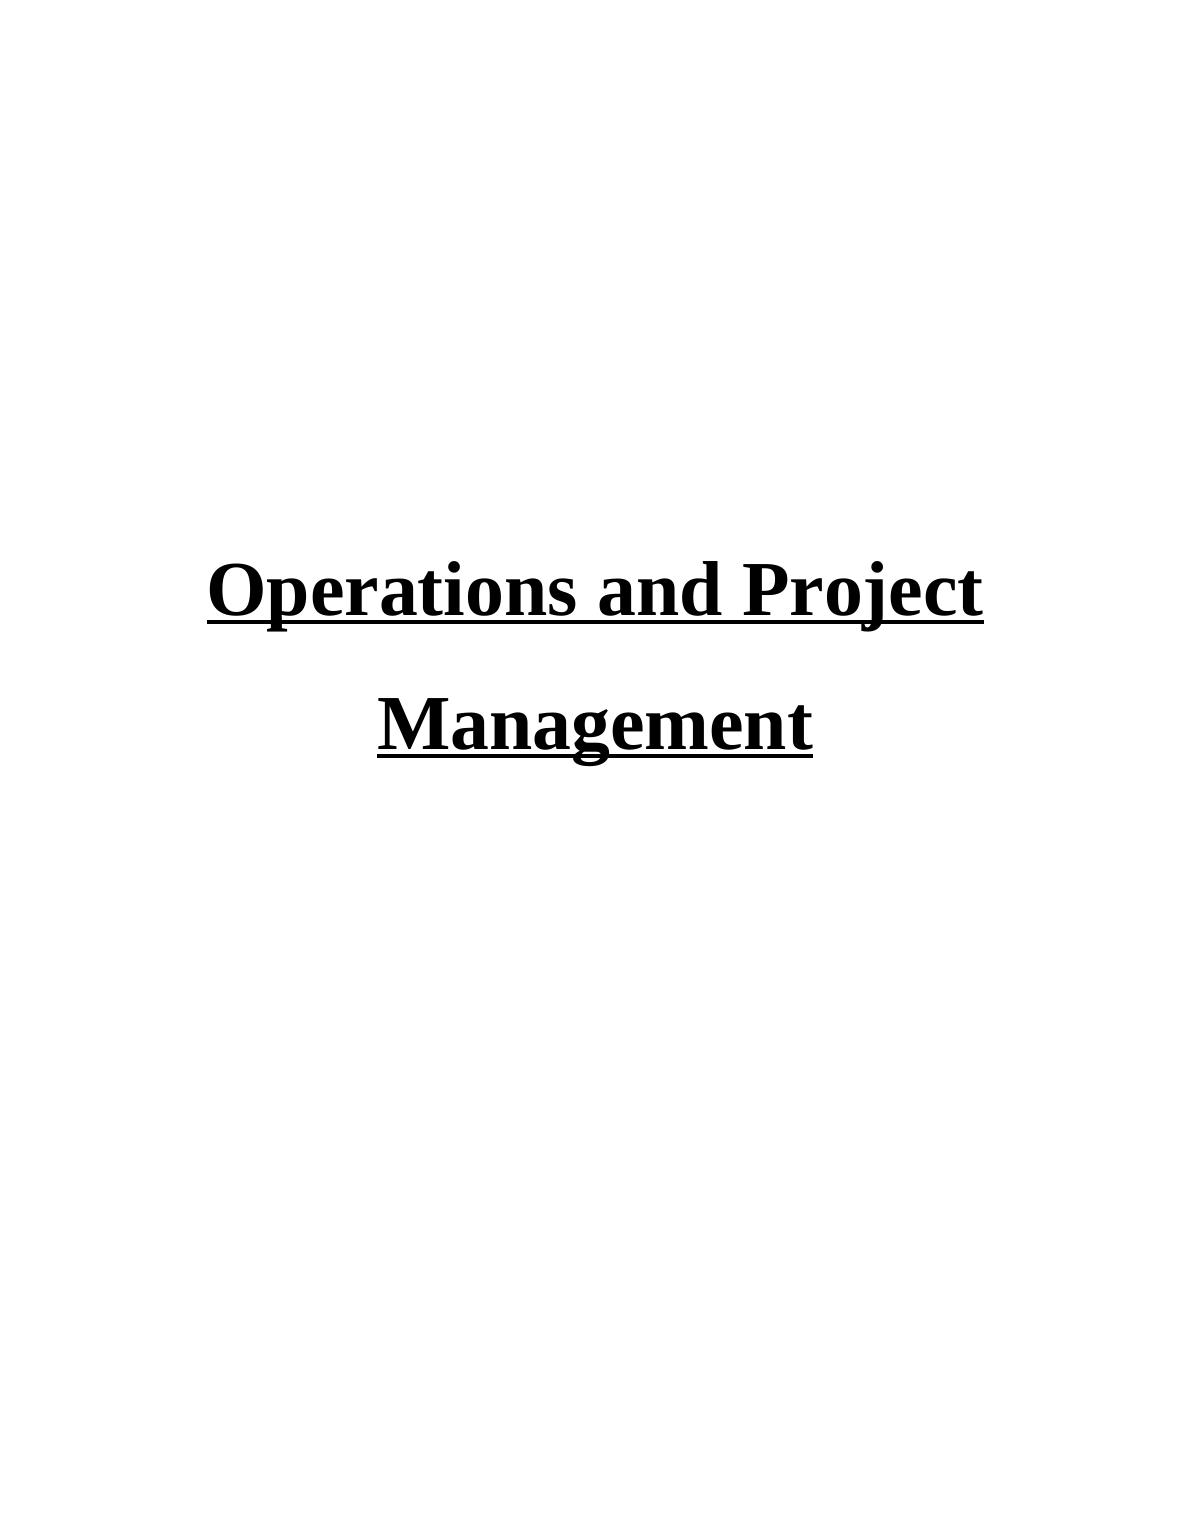 Operations and Project Management - Assignment Solution_1